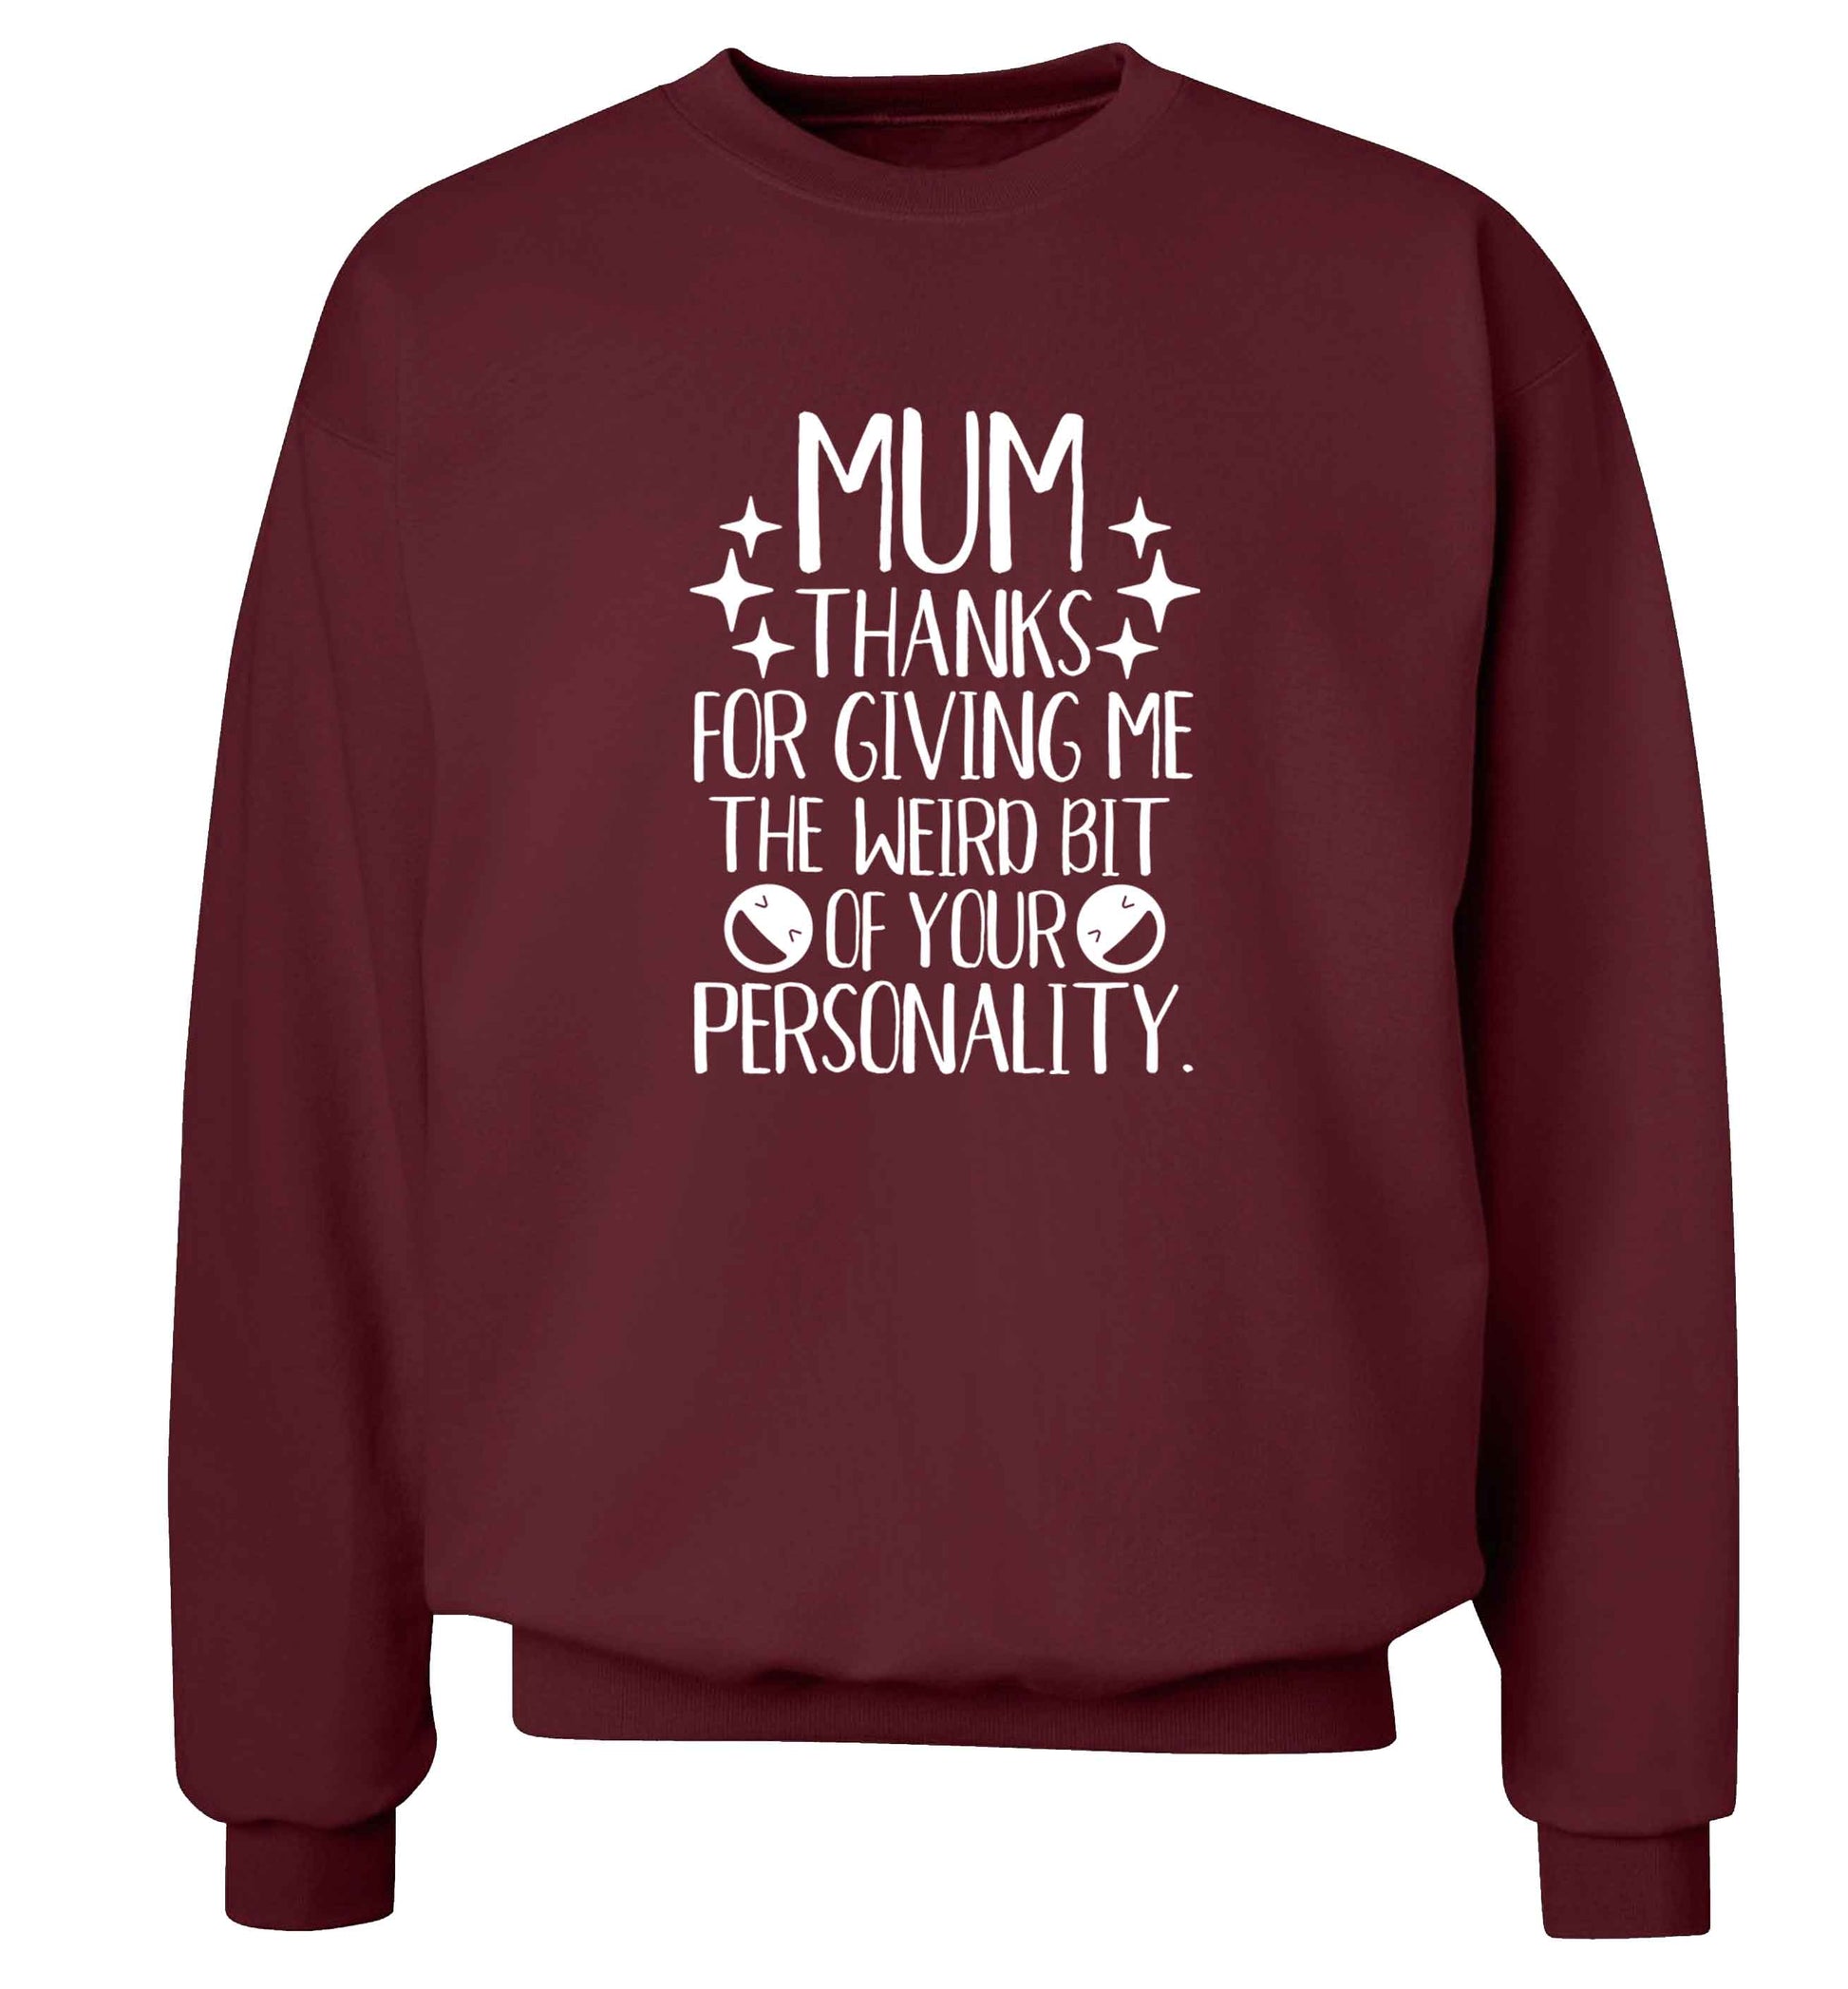 Mum, I love you more than halloumi and if you know me at all you know how deep that is adult's unisex maroon sweater 2XL